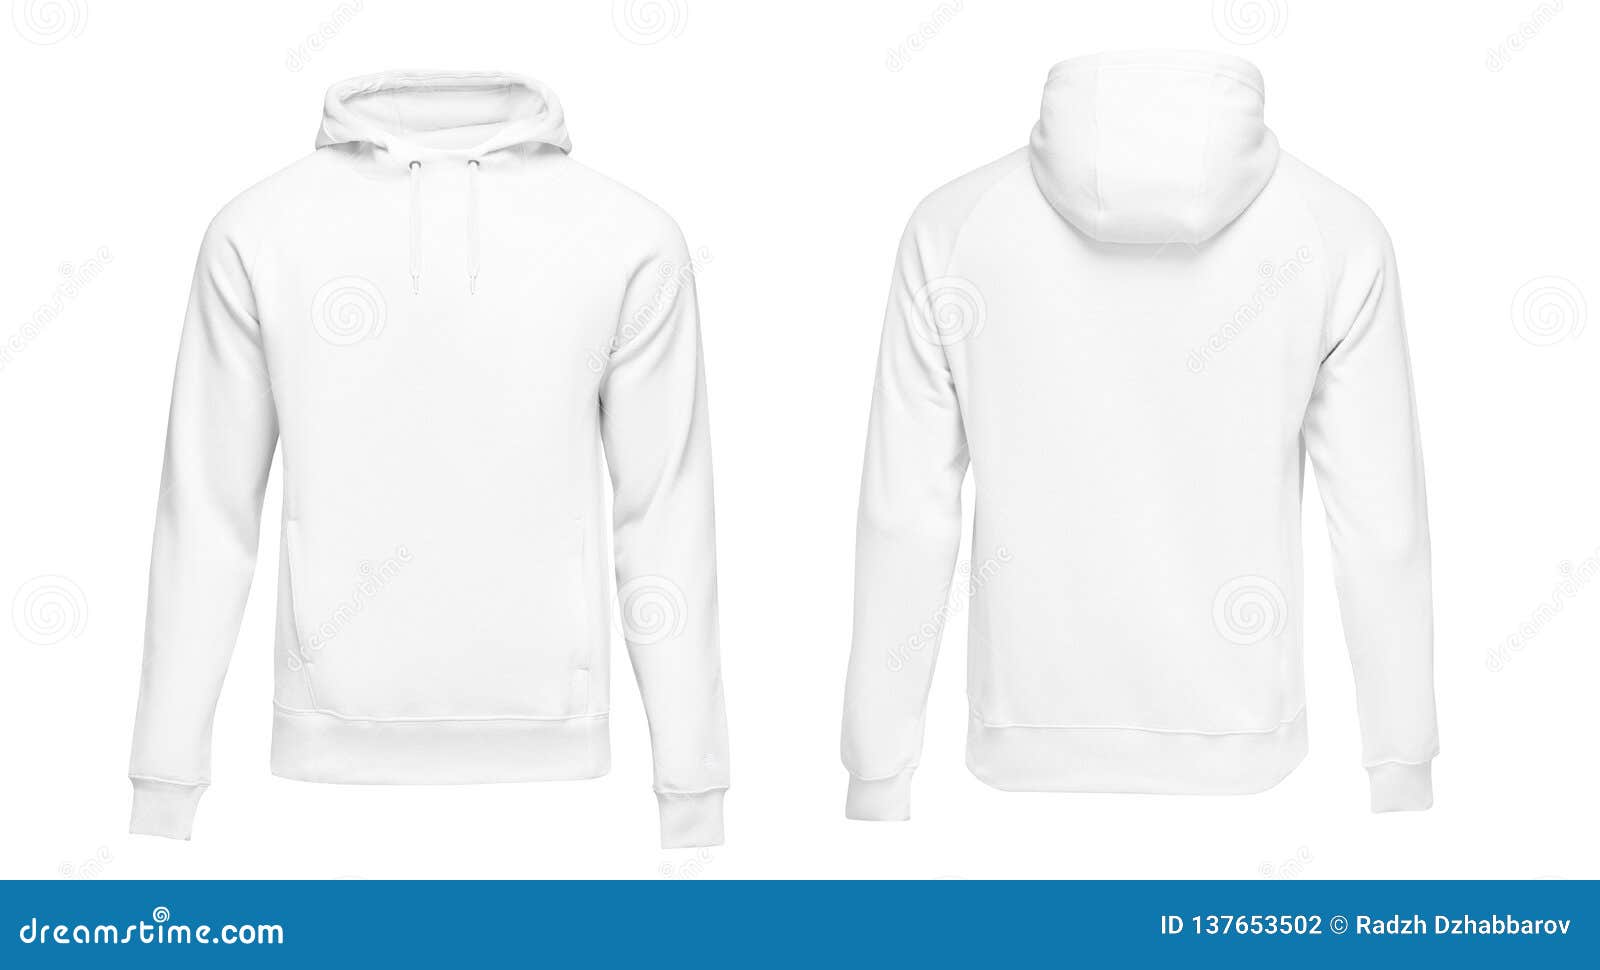 Download White Male Hoodie Sweatshirt Long Sleeve With Clipping ...